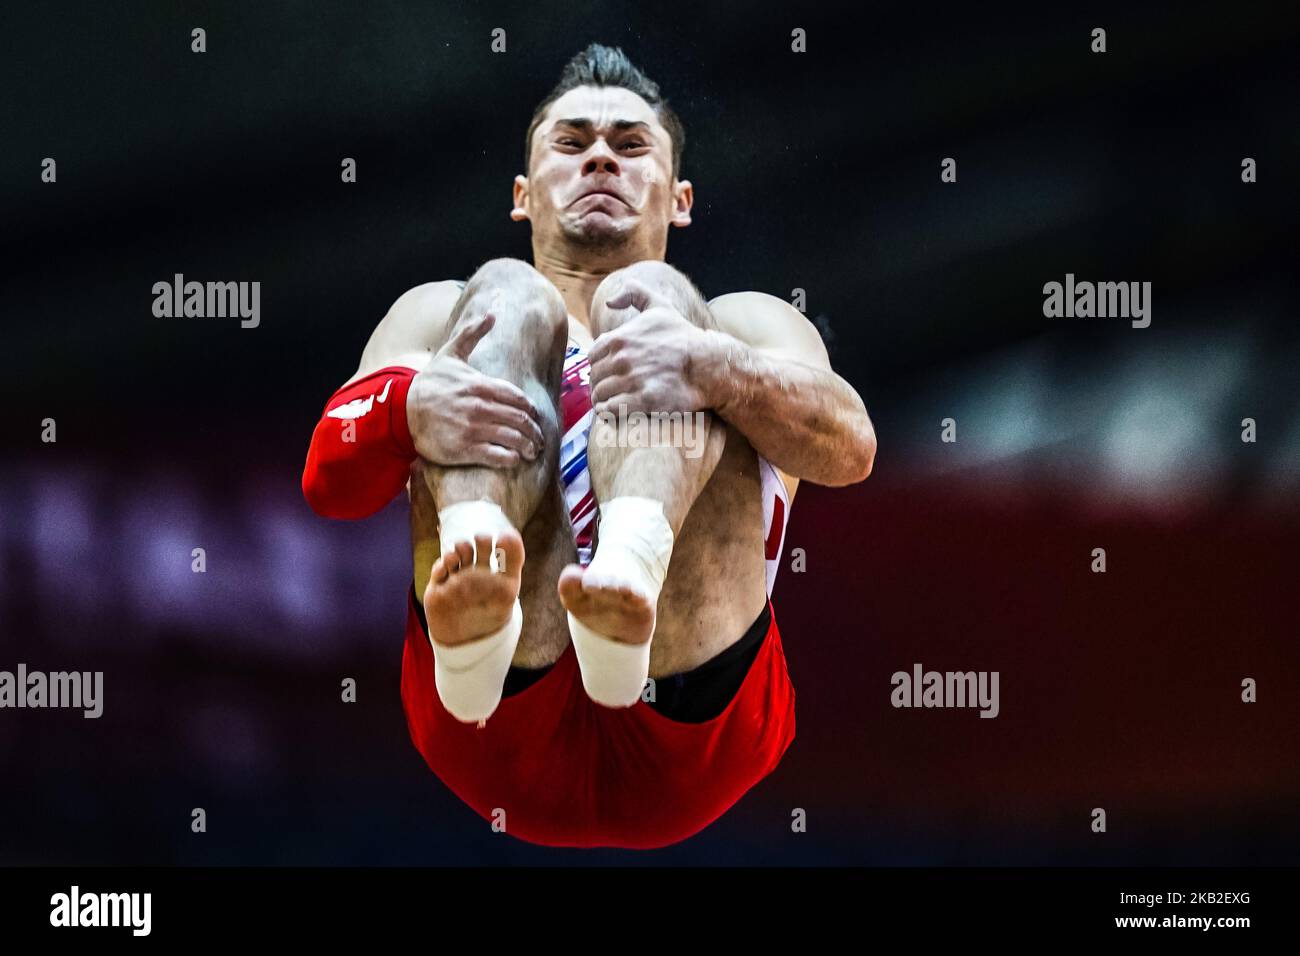 Colin Van W?cklen of United States during Vault qualification at the Aspire Dome in Doha, Qatar, Artistic FIG Gymnastics World Championships on 26 of October 2018. (Photo by Ulrik Pedersen/NurPhoto) Stock Photo